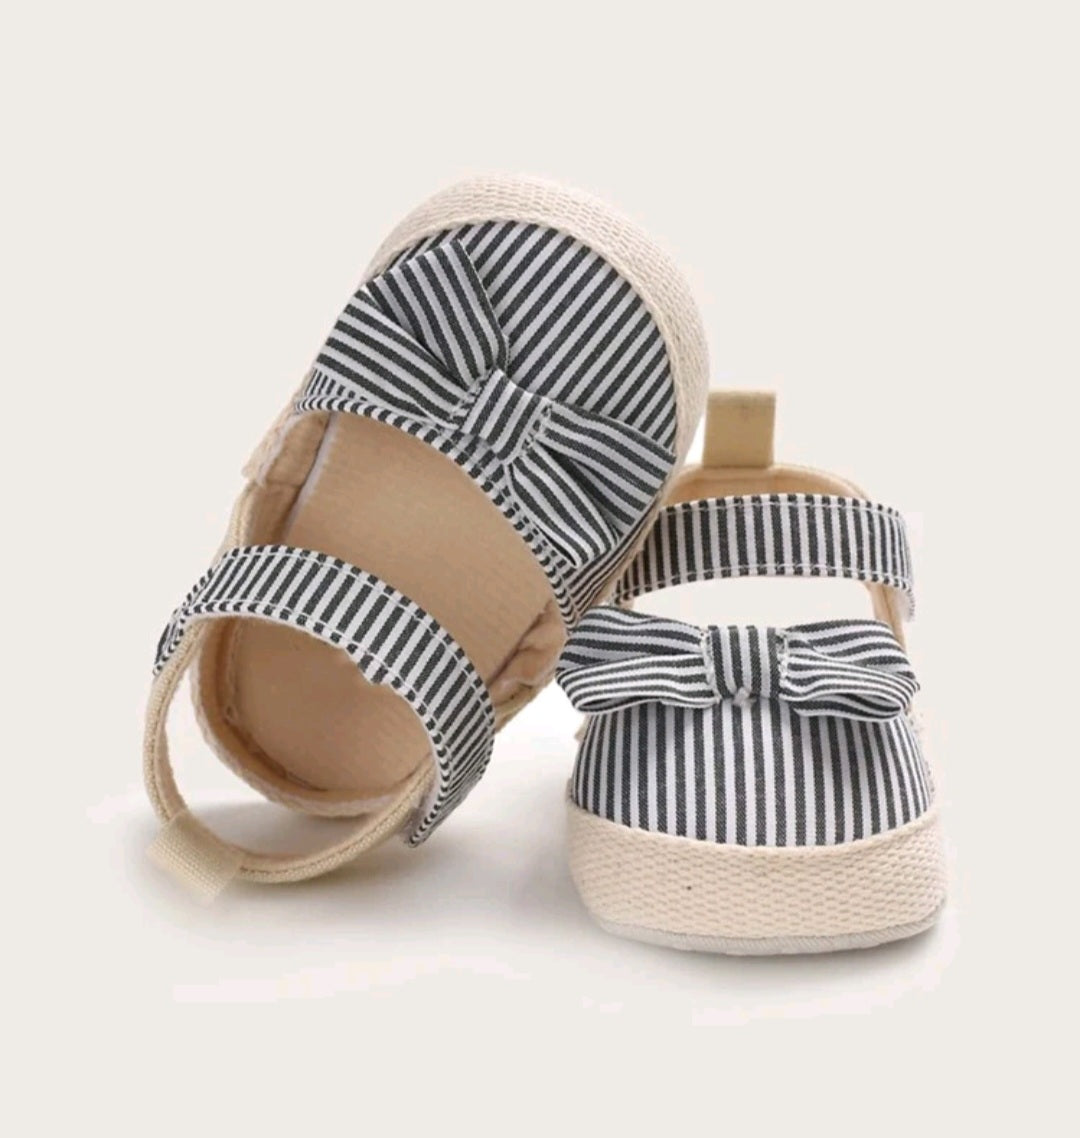 Navy and White Striped Sandals